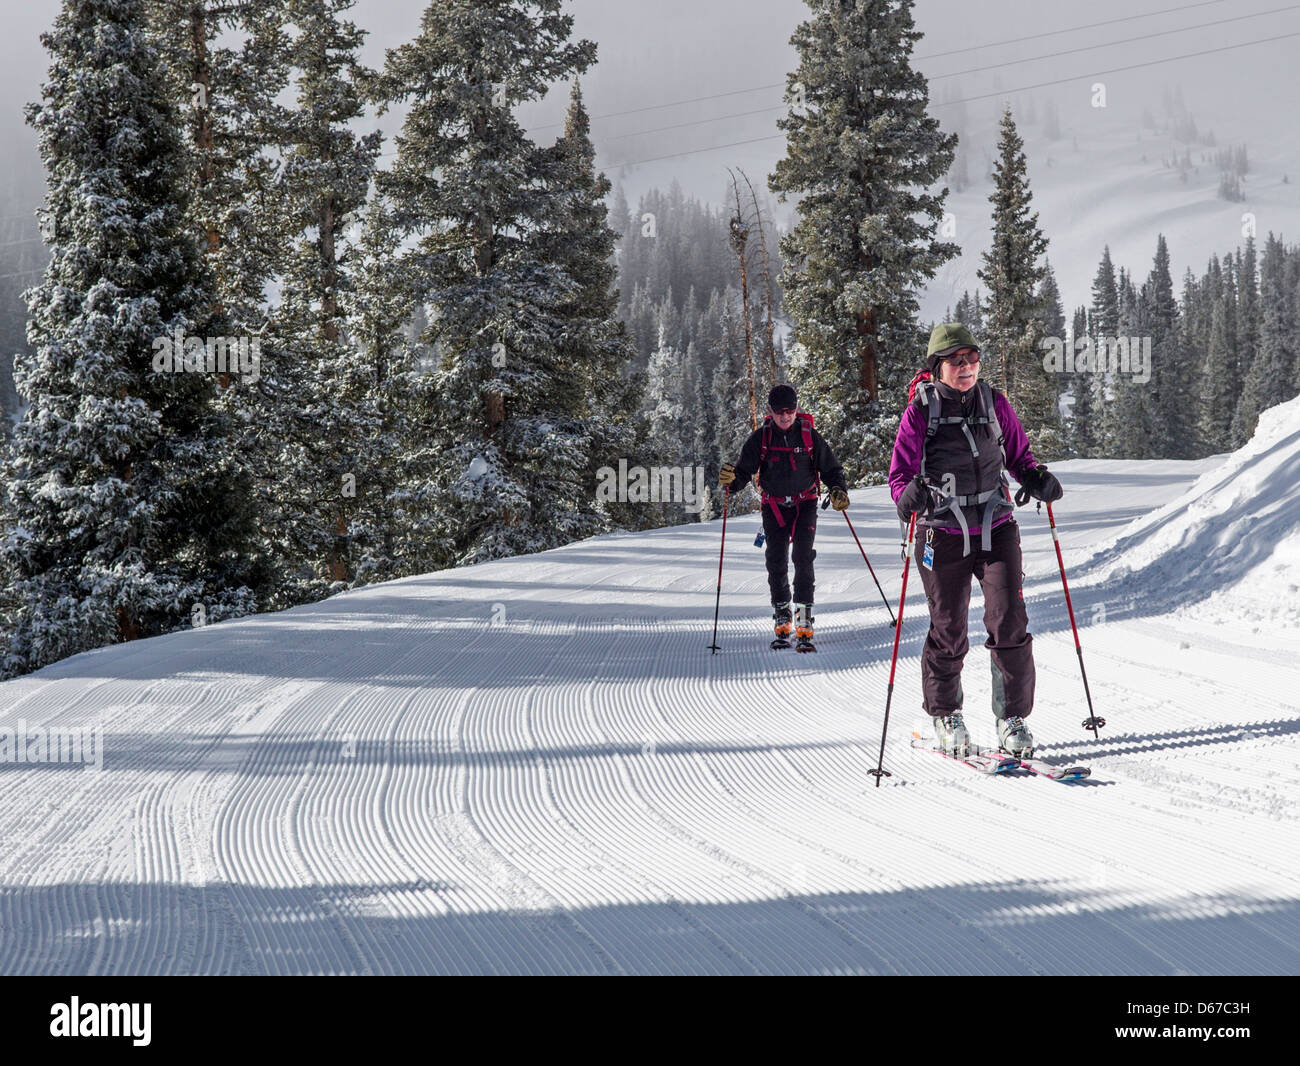 Man and woman skinning uphill on alpine touring skis at Monarch Mountain, Continental Divide, Colorado, USA Stock Photo